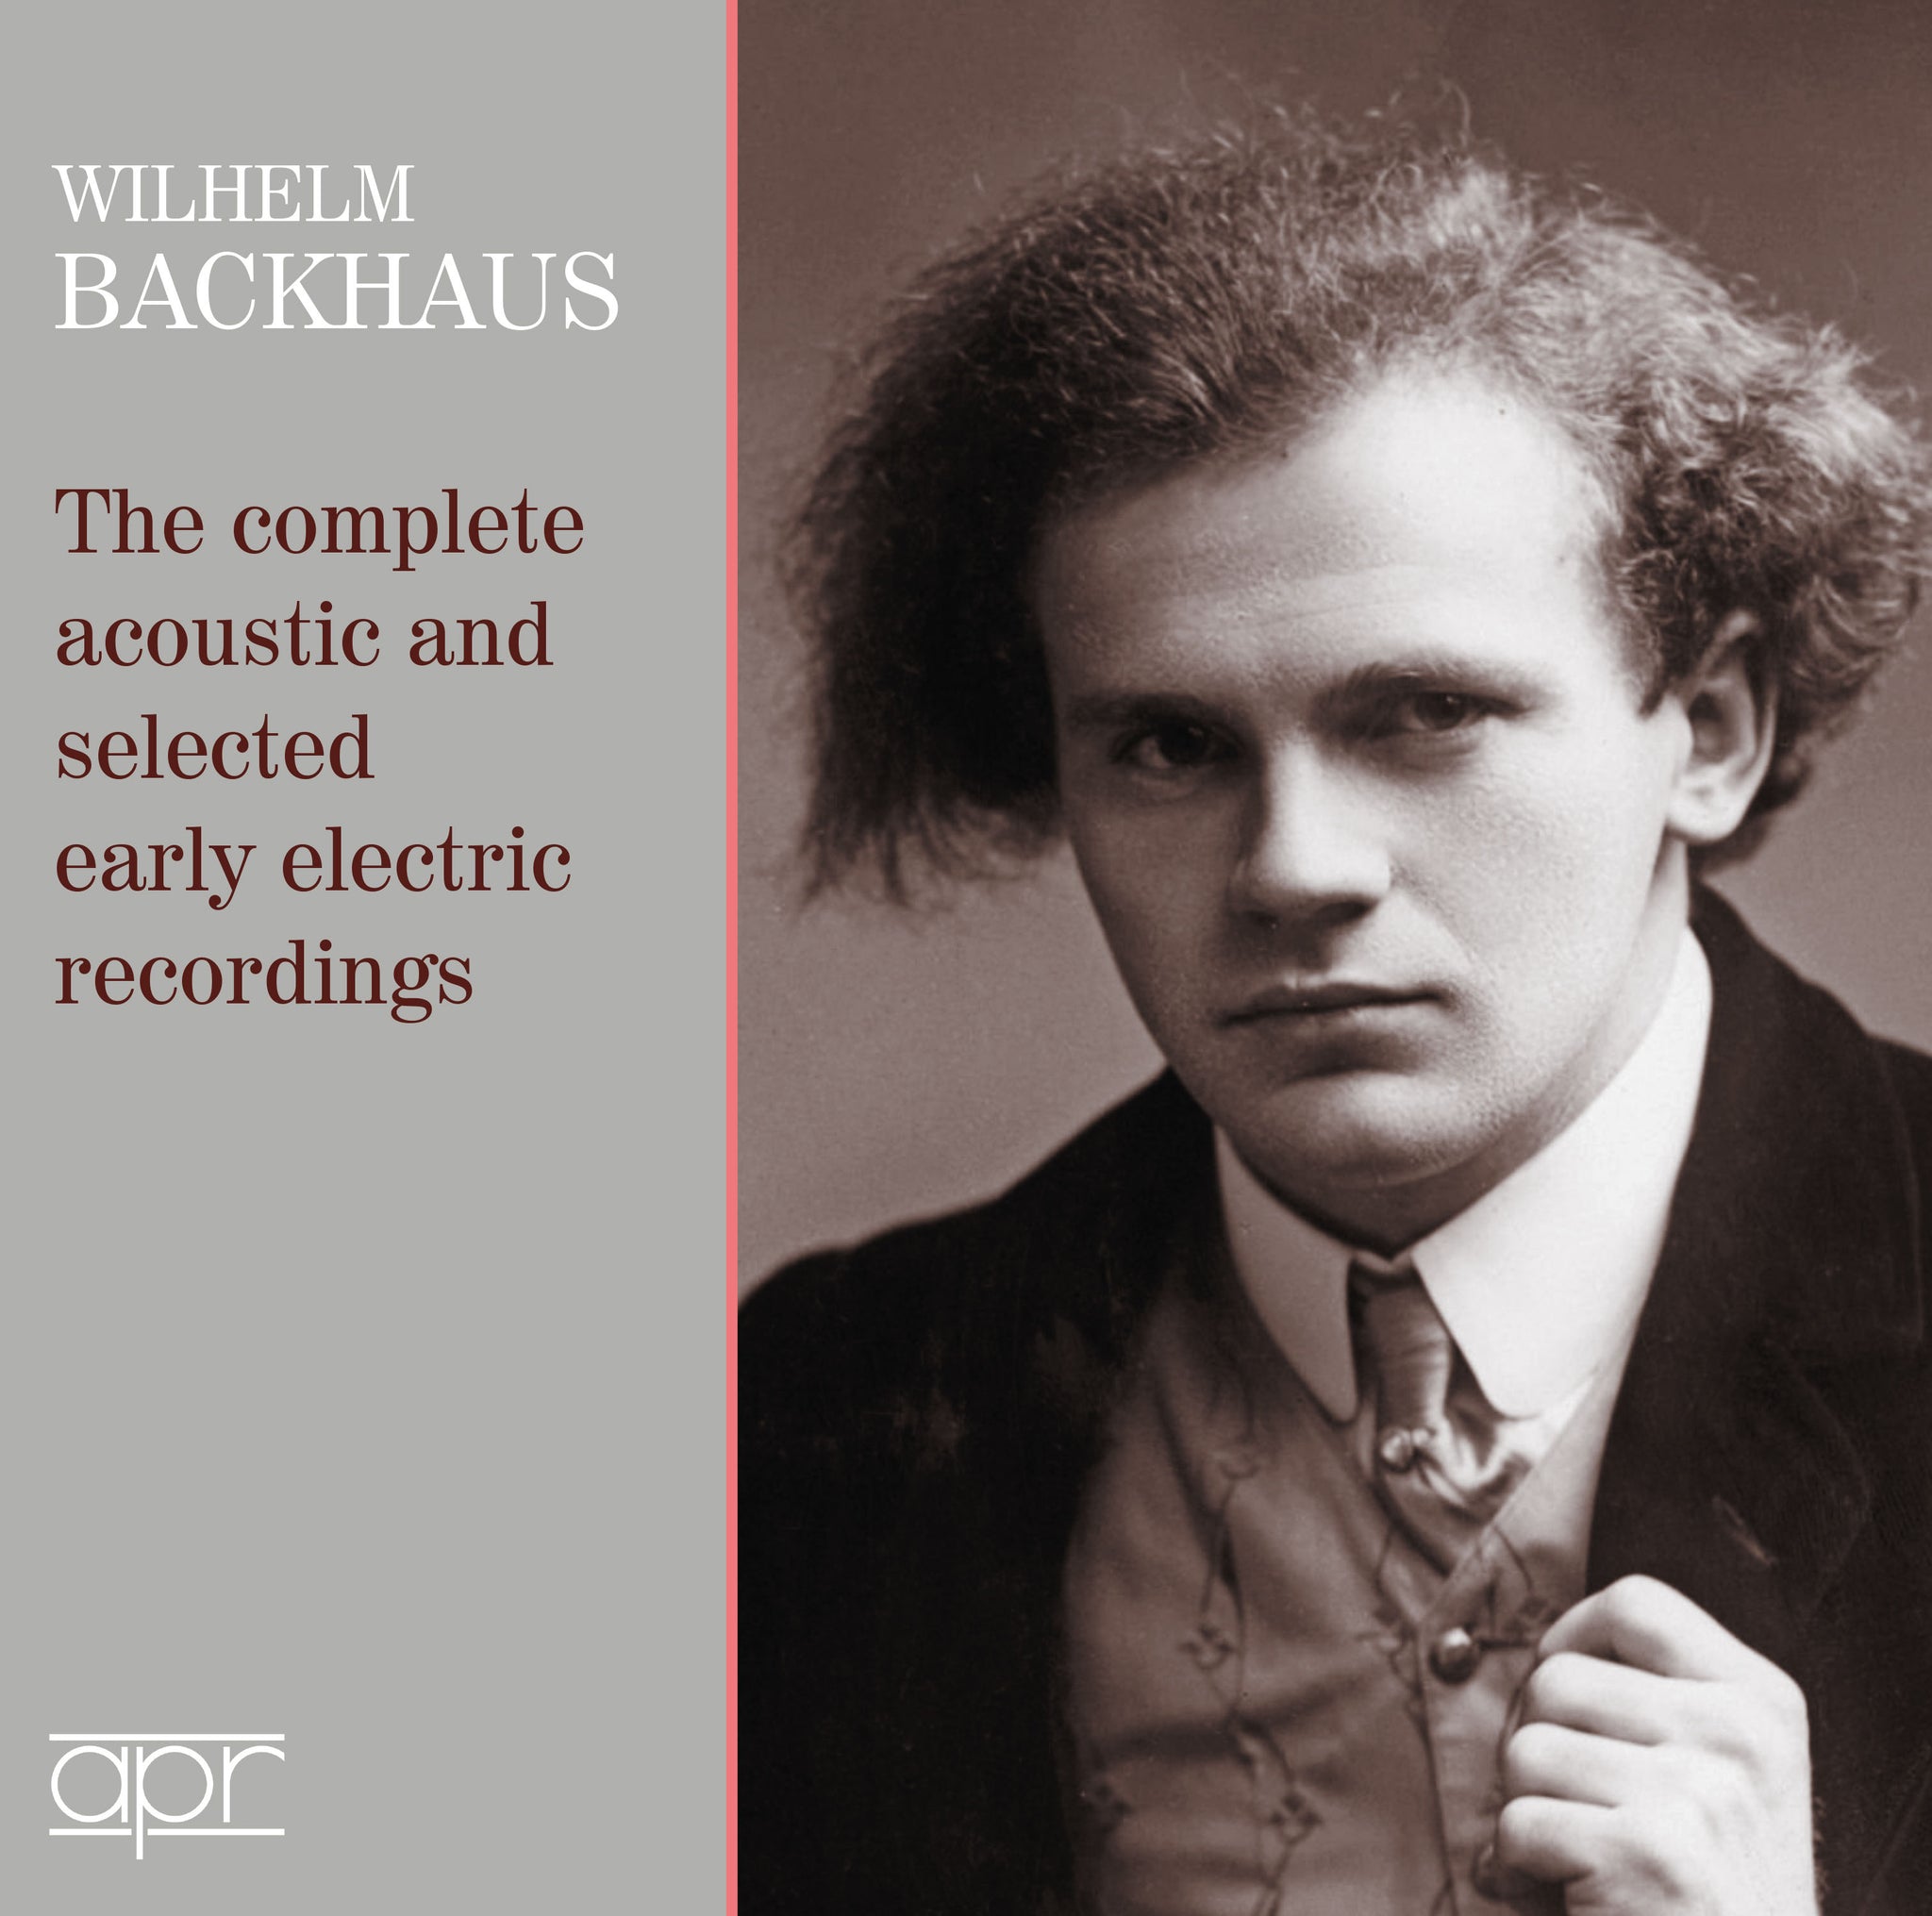 Wilhelm Backhaus - The Complete Acoustic & Selected Early Electric Recordings